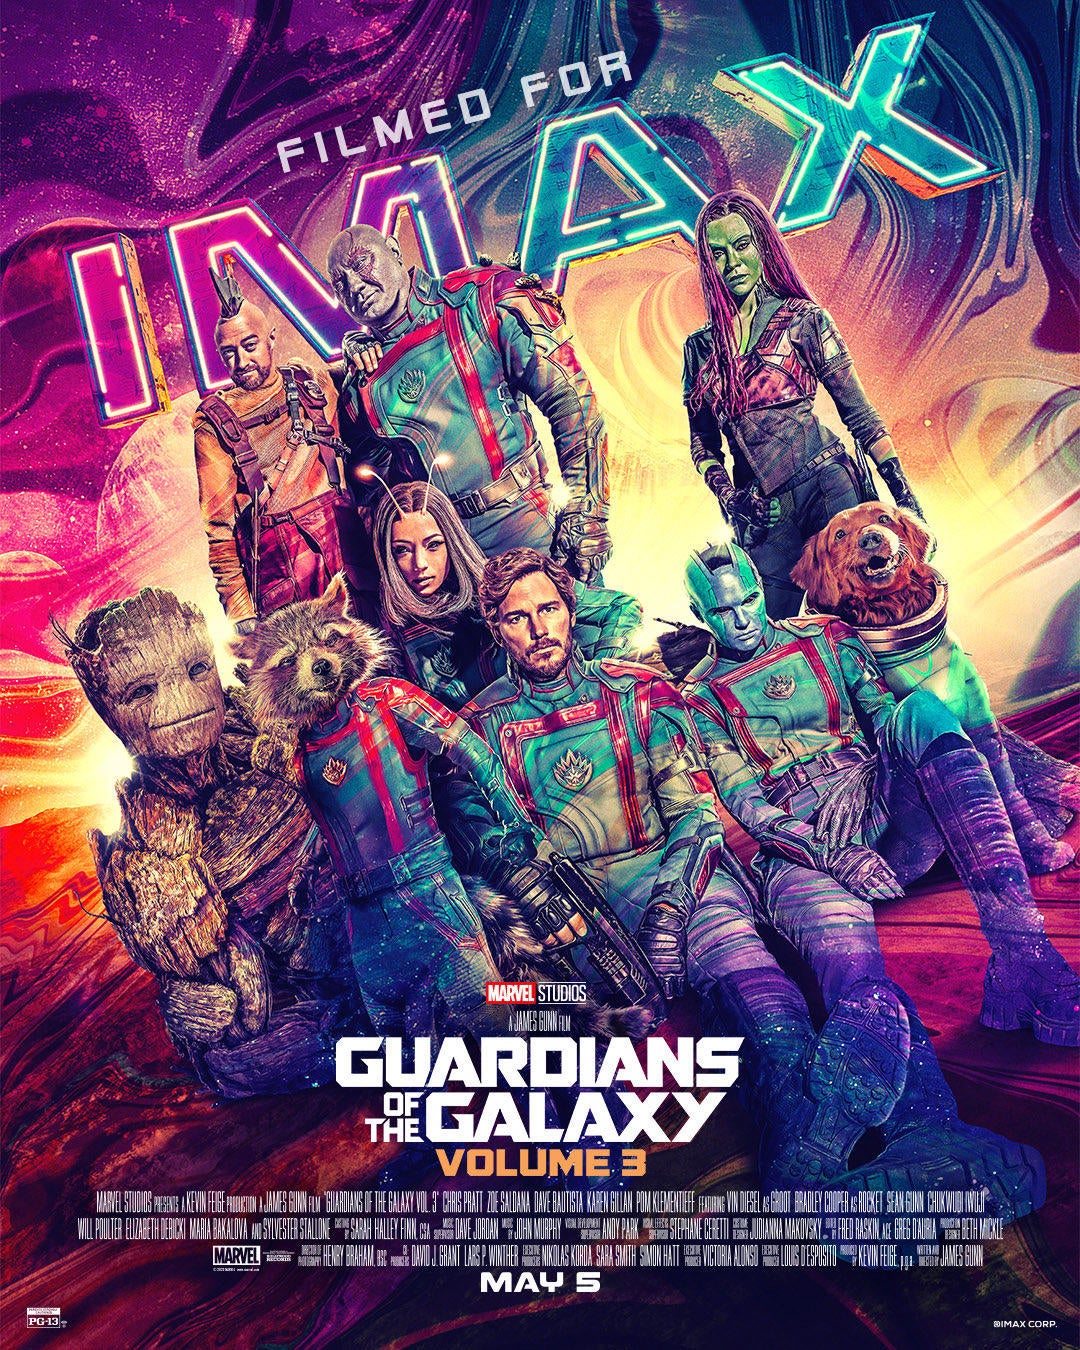 Guardians of the Galaxy Vol. 3 Reveals Multiple New Posters